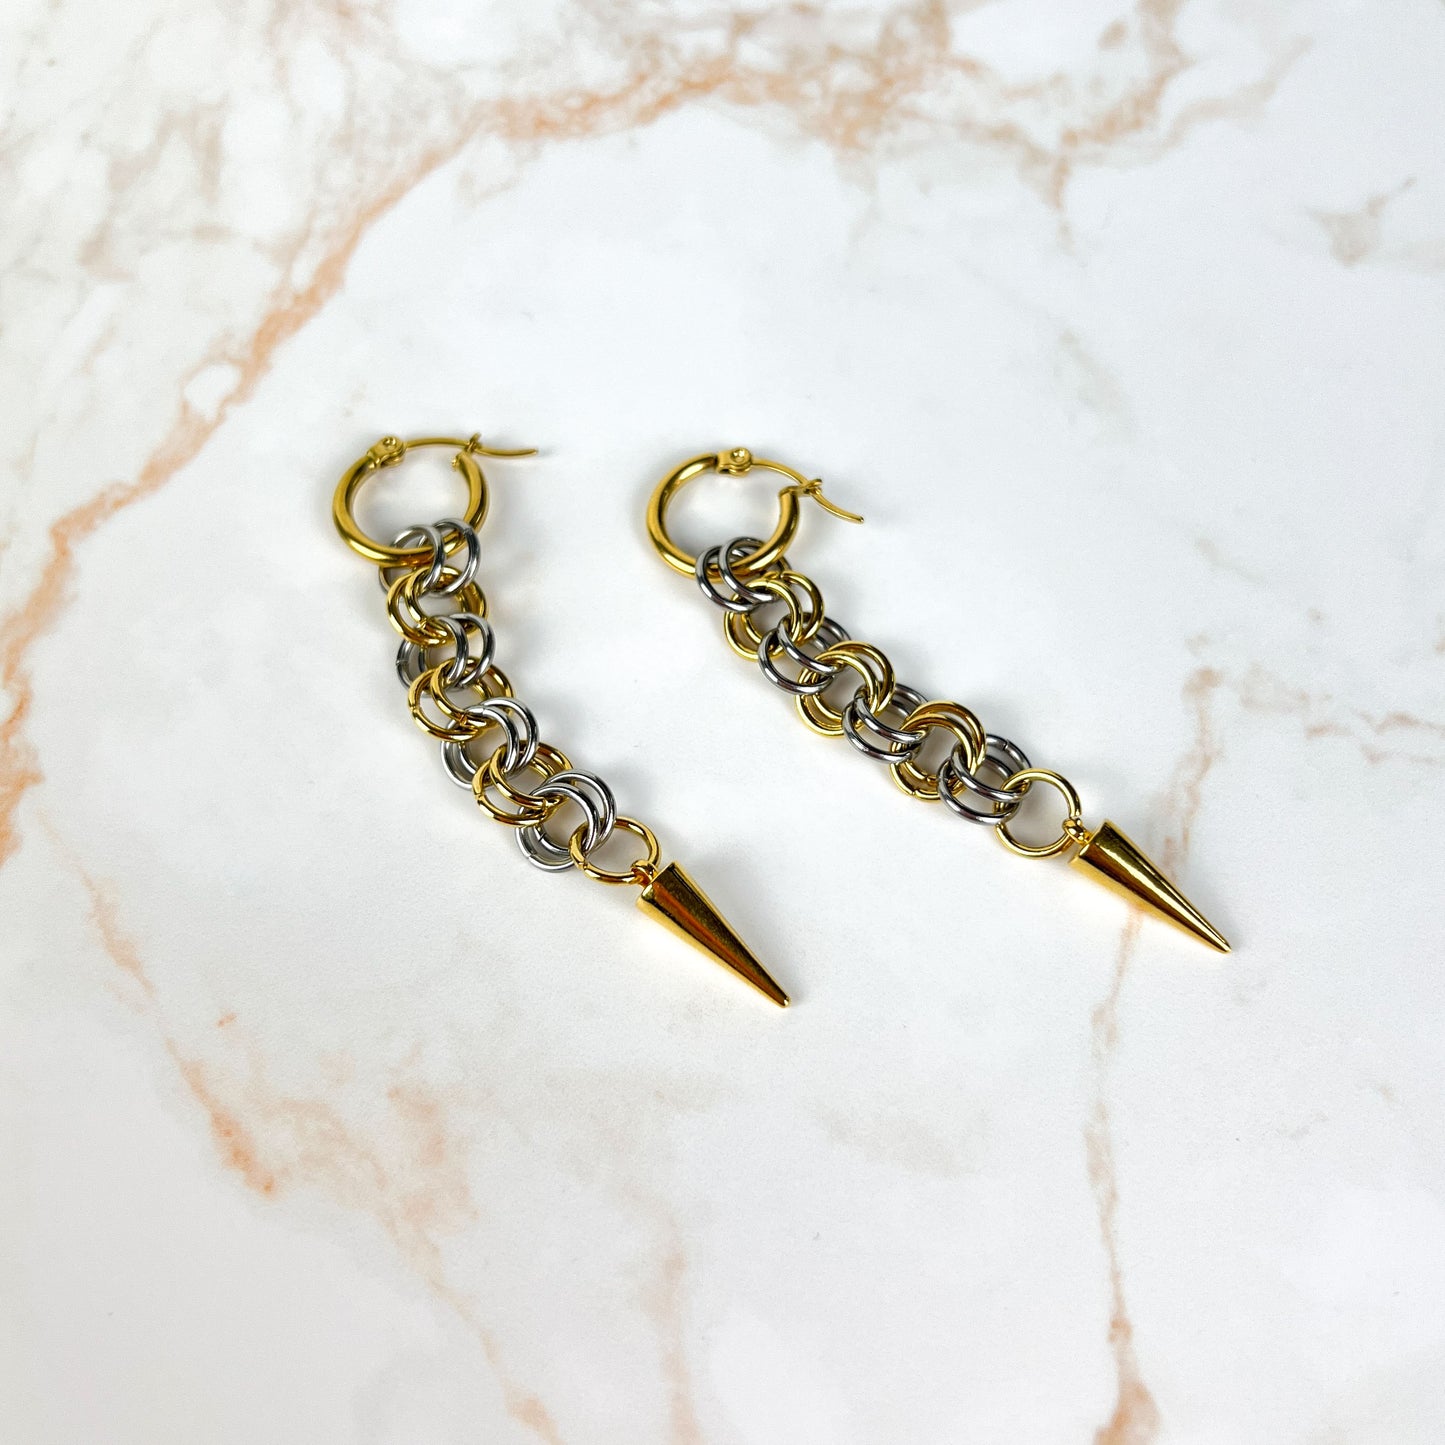 Silver and gold mixed metal chainmail earrings, hoops and spikes